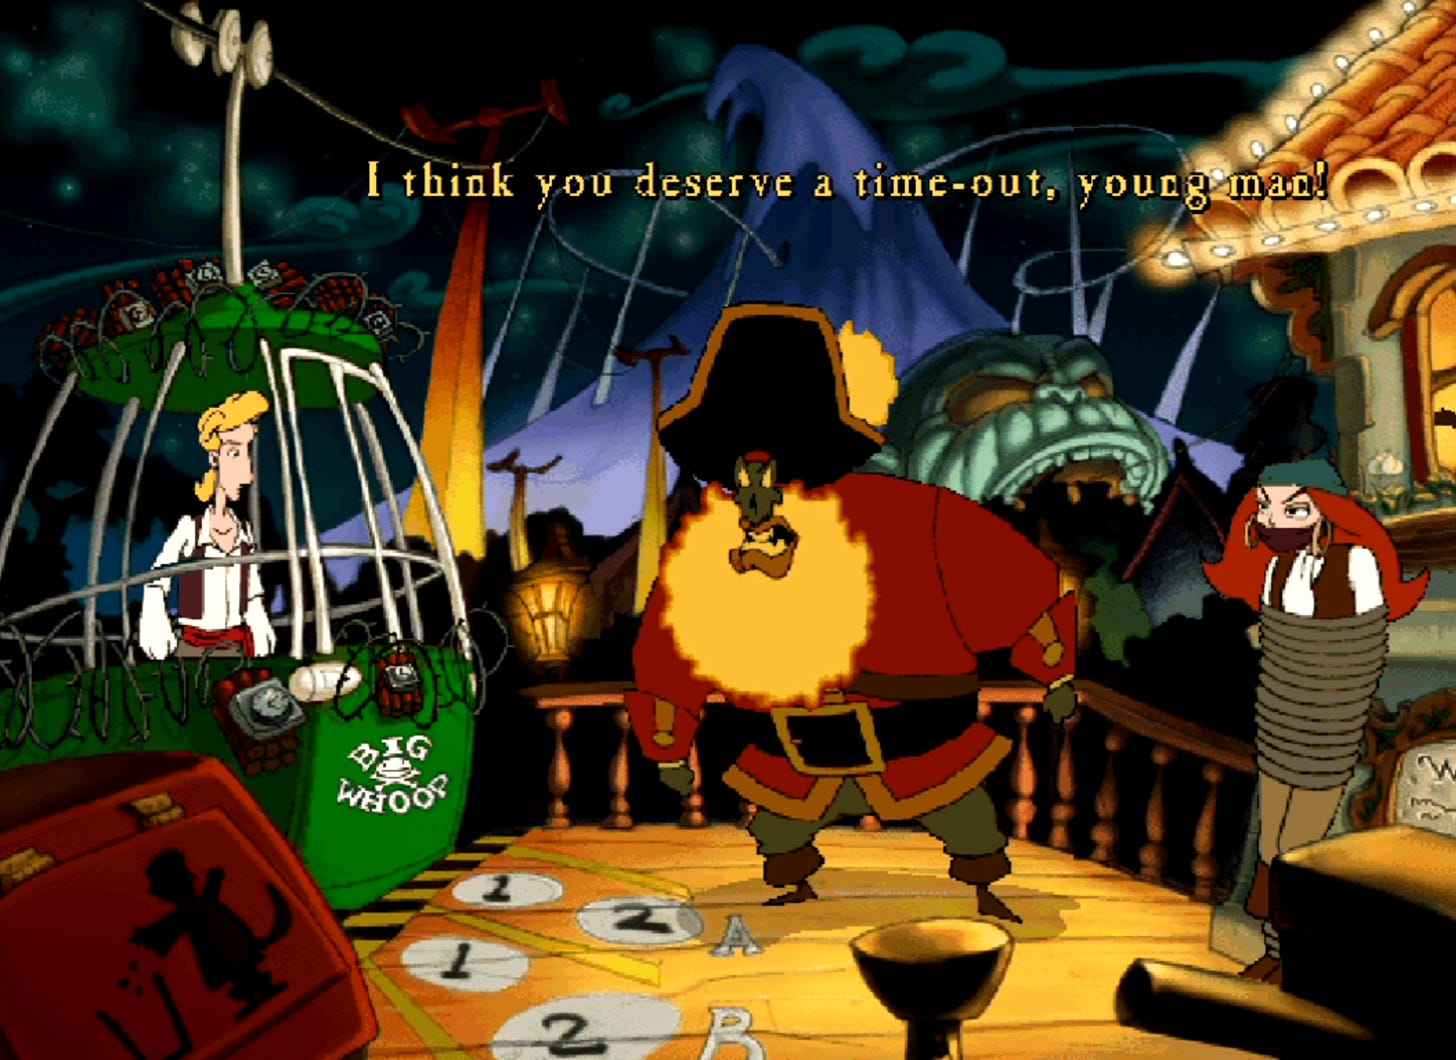 LeChuck: "I think you deserve a time-out, young man!"